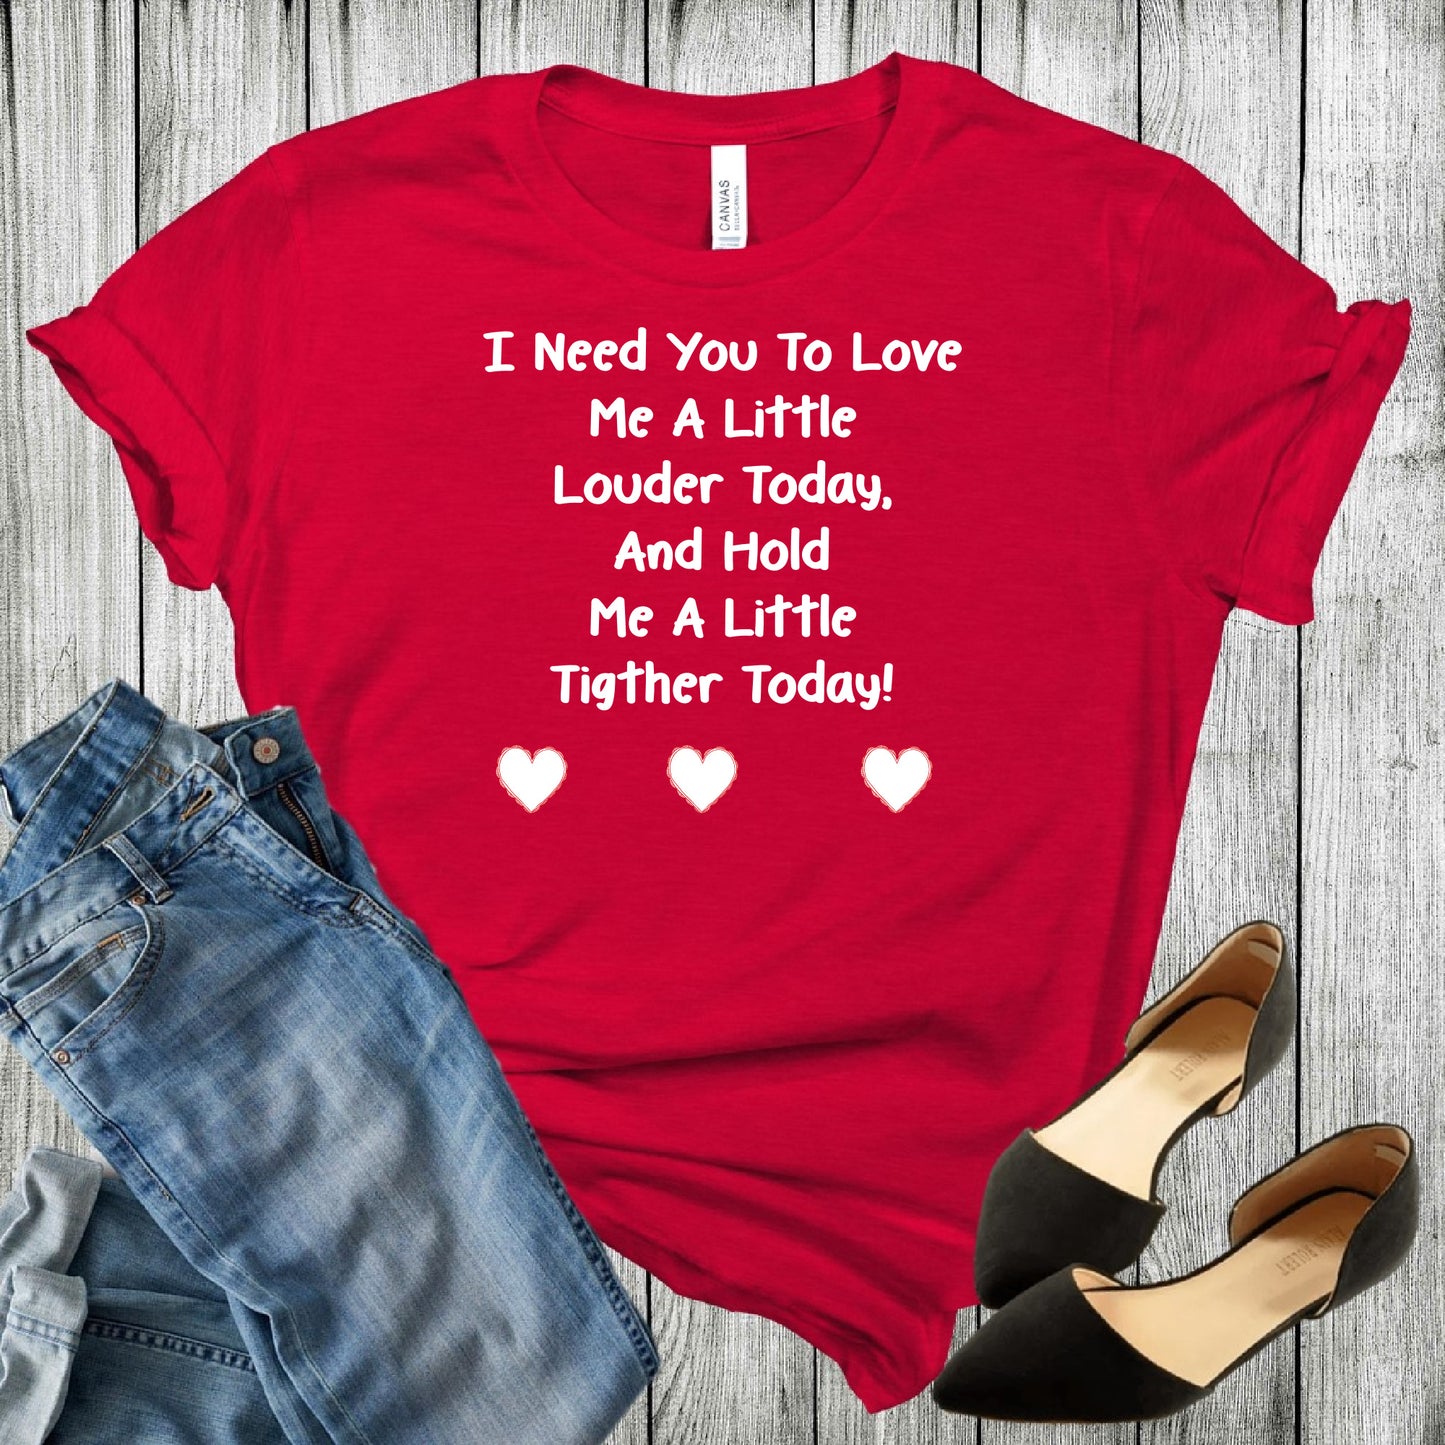 Grit City Rebel I need you to  Love me a little louder today and hold me a little tighter today white lettering on a red unisex TShirt in sizing small to 3X